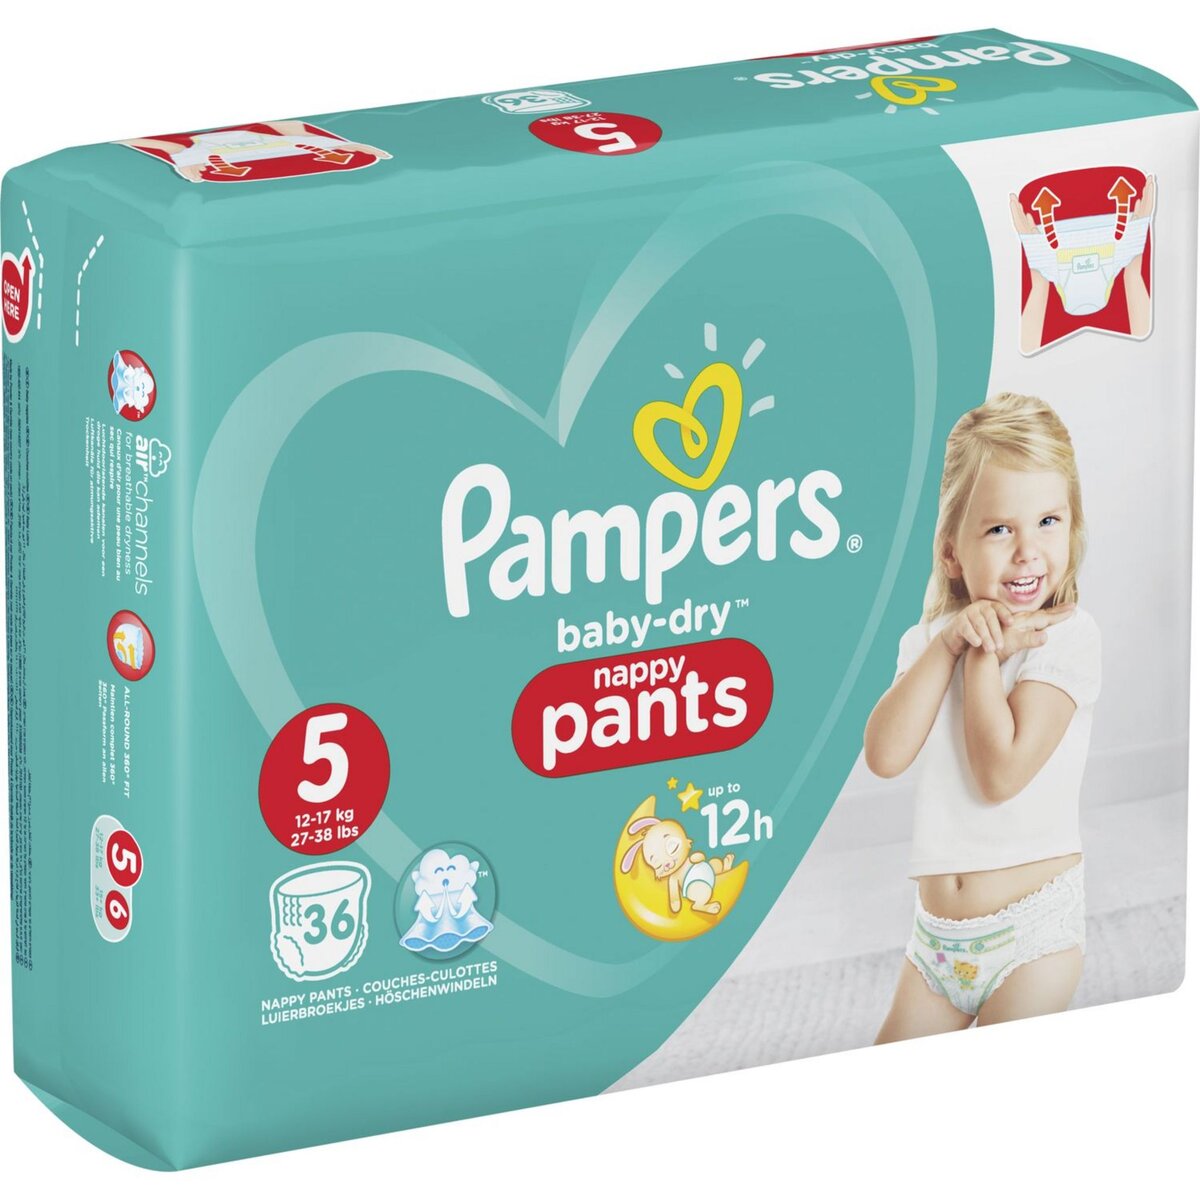 PAMPERS Baby-dry pants couches-culottes taille 5 (12-17kg) 36 couches